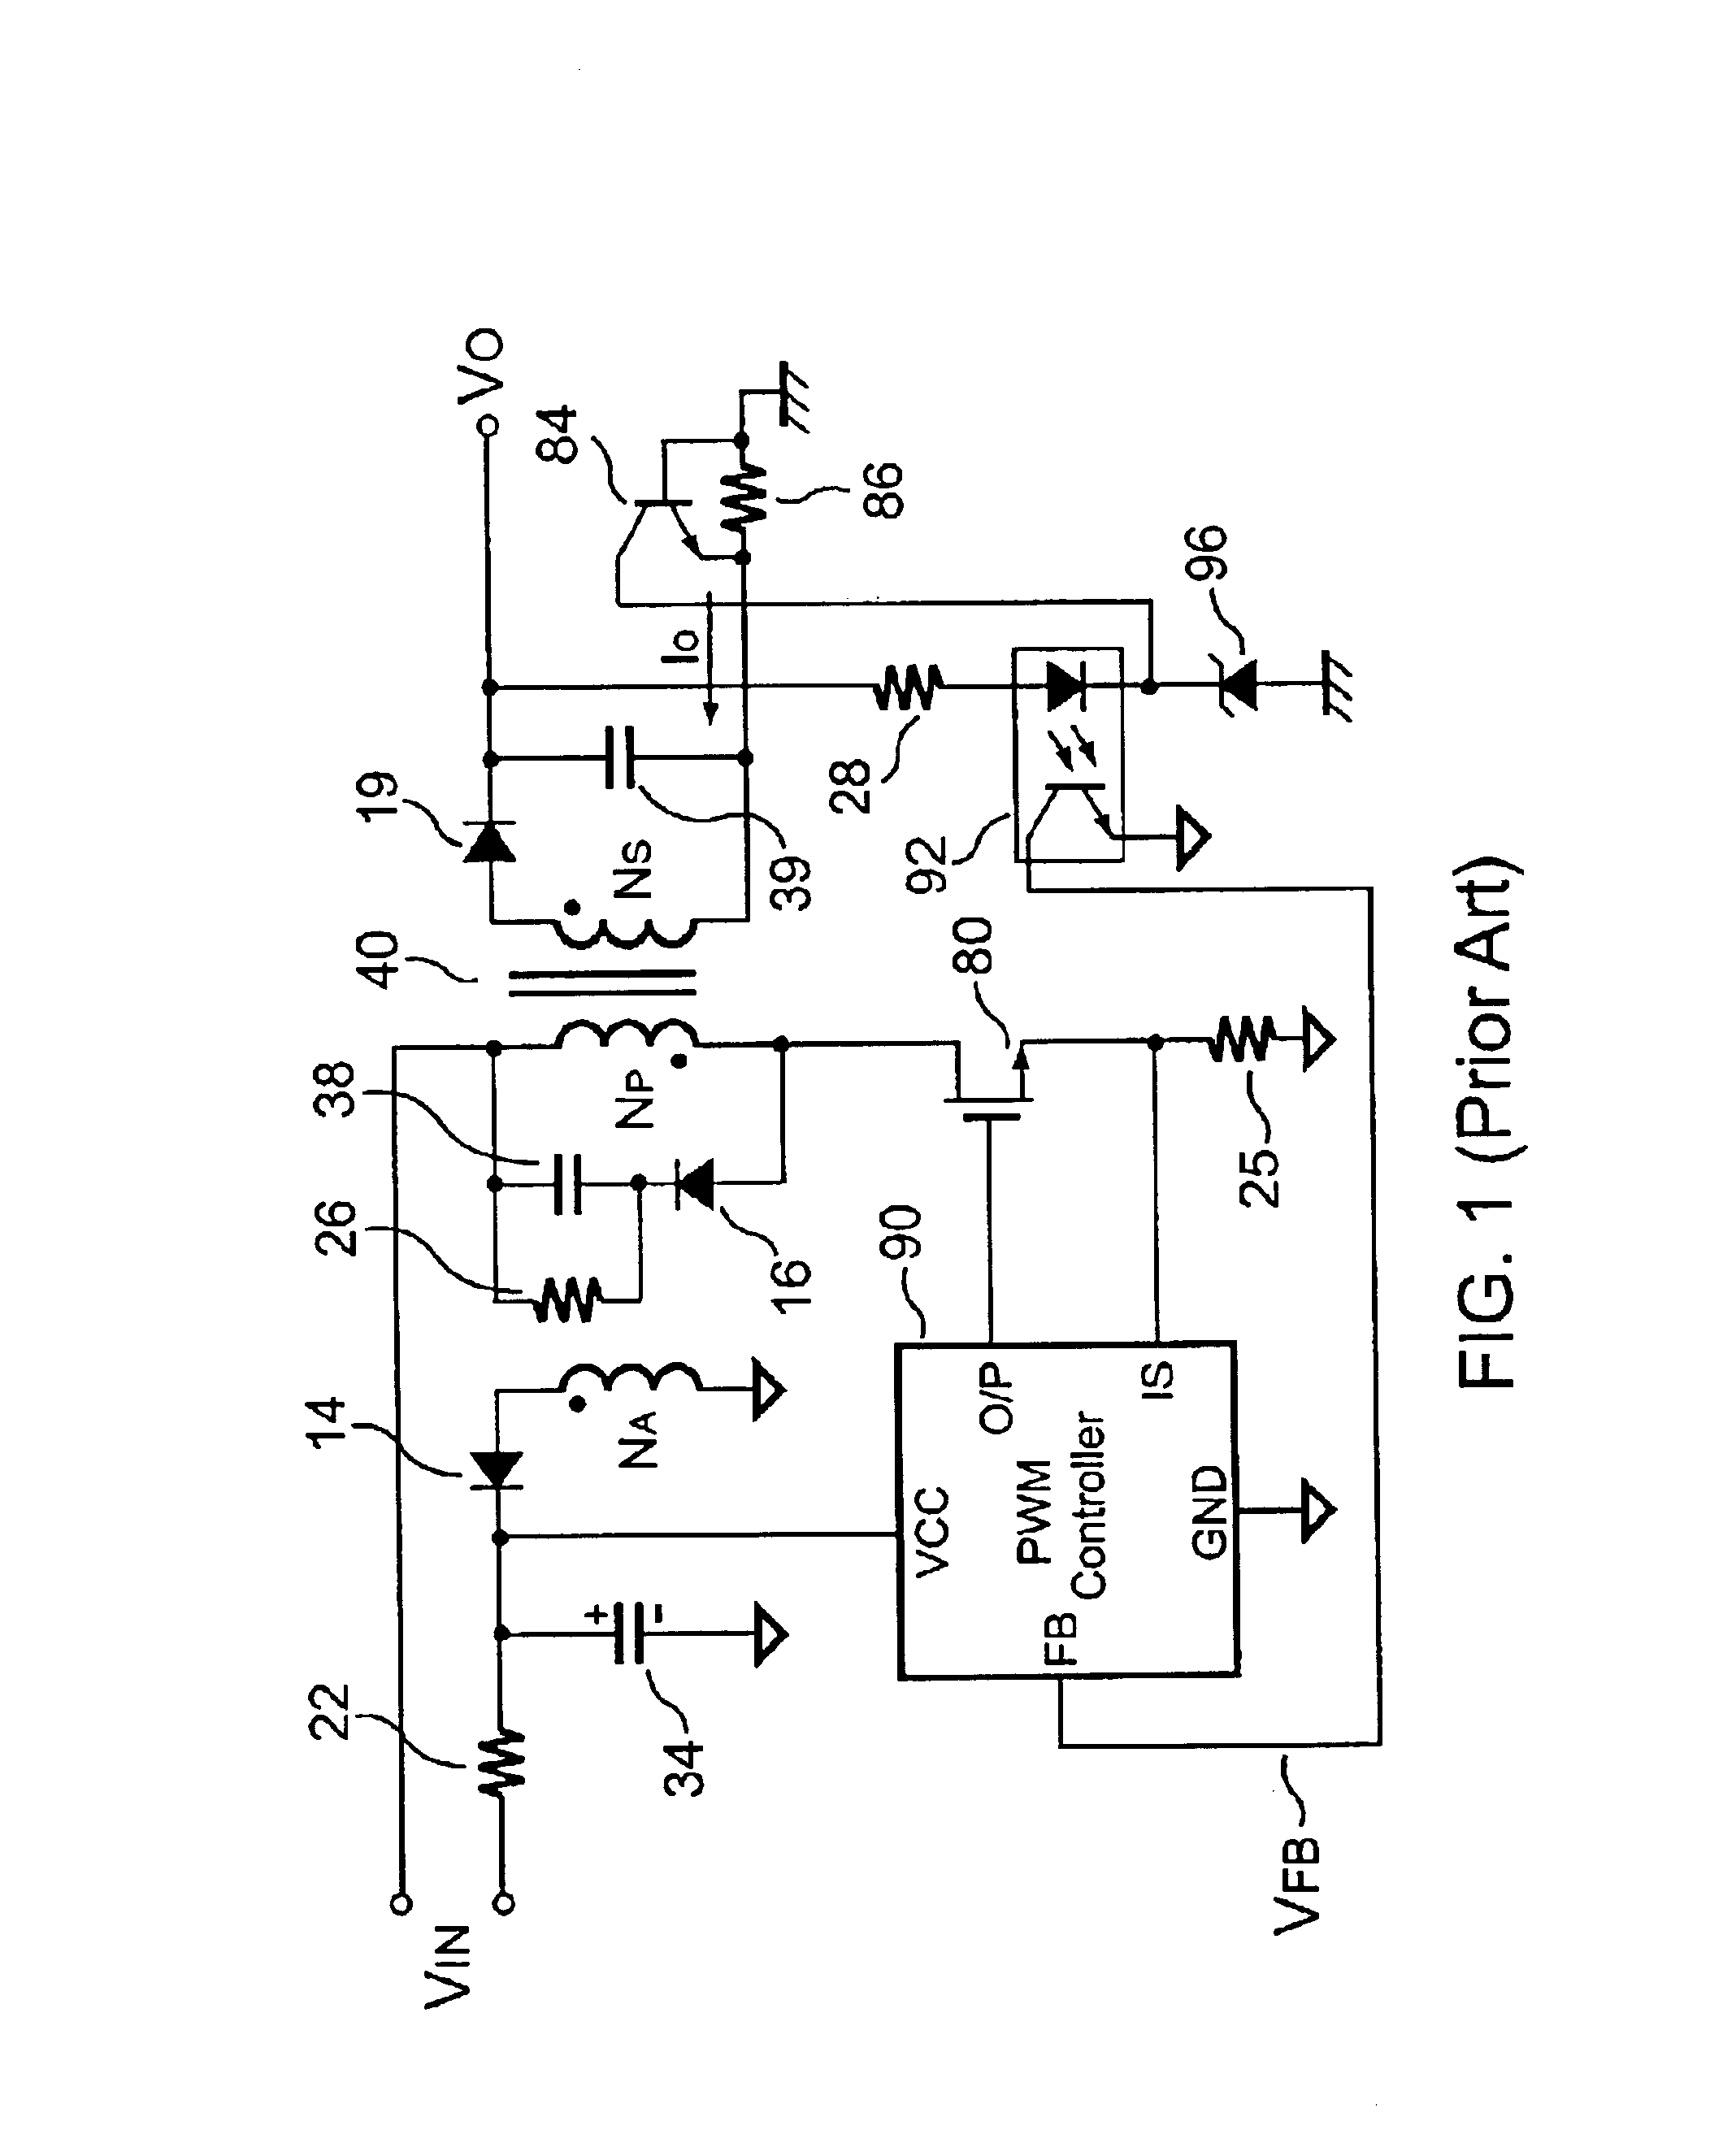 Flyback power converter having a constant voltage and a constant current output under primary-side PWM control